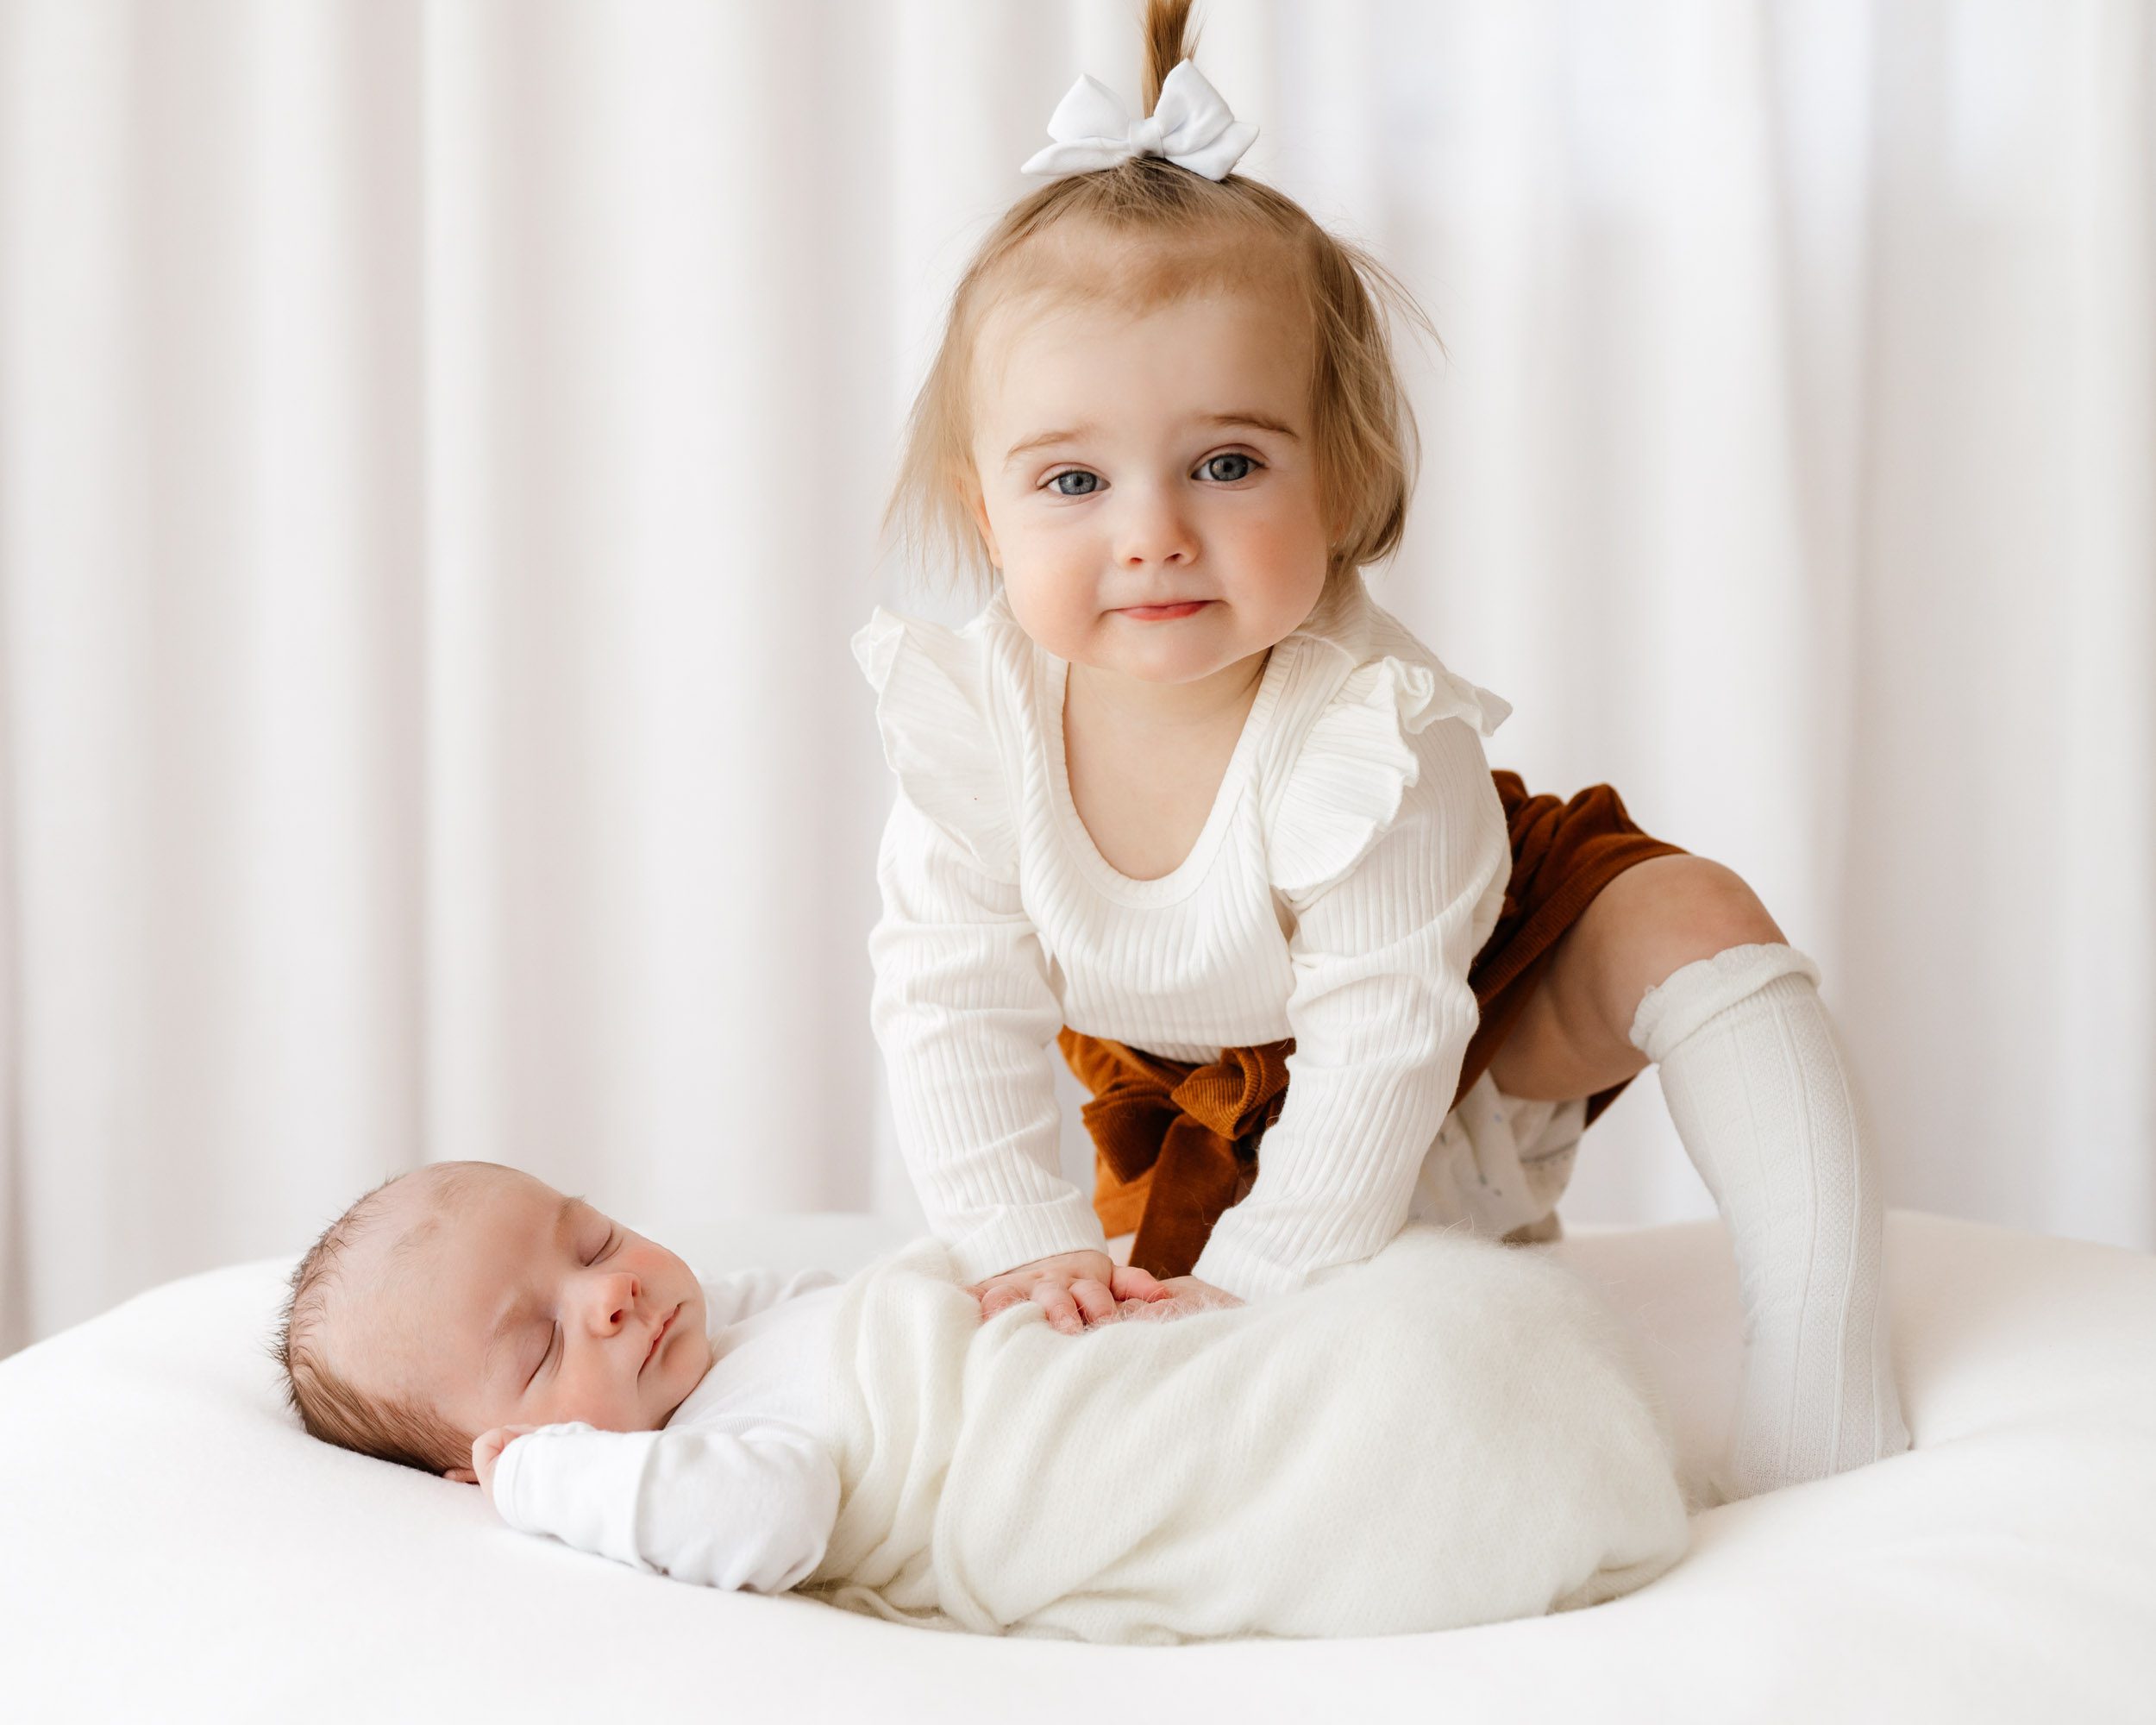 a baby boy wrapped in a white swaddle blanket laying on a white bean bag while his big sister kneels above him looking directly at the camera with a hint of a smile on her face during a lifestyle newborn photoshoot